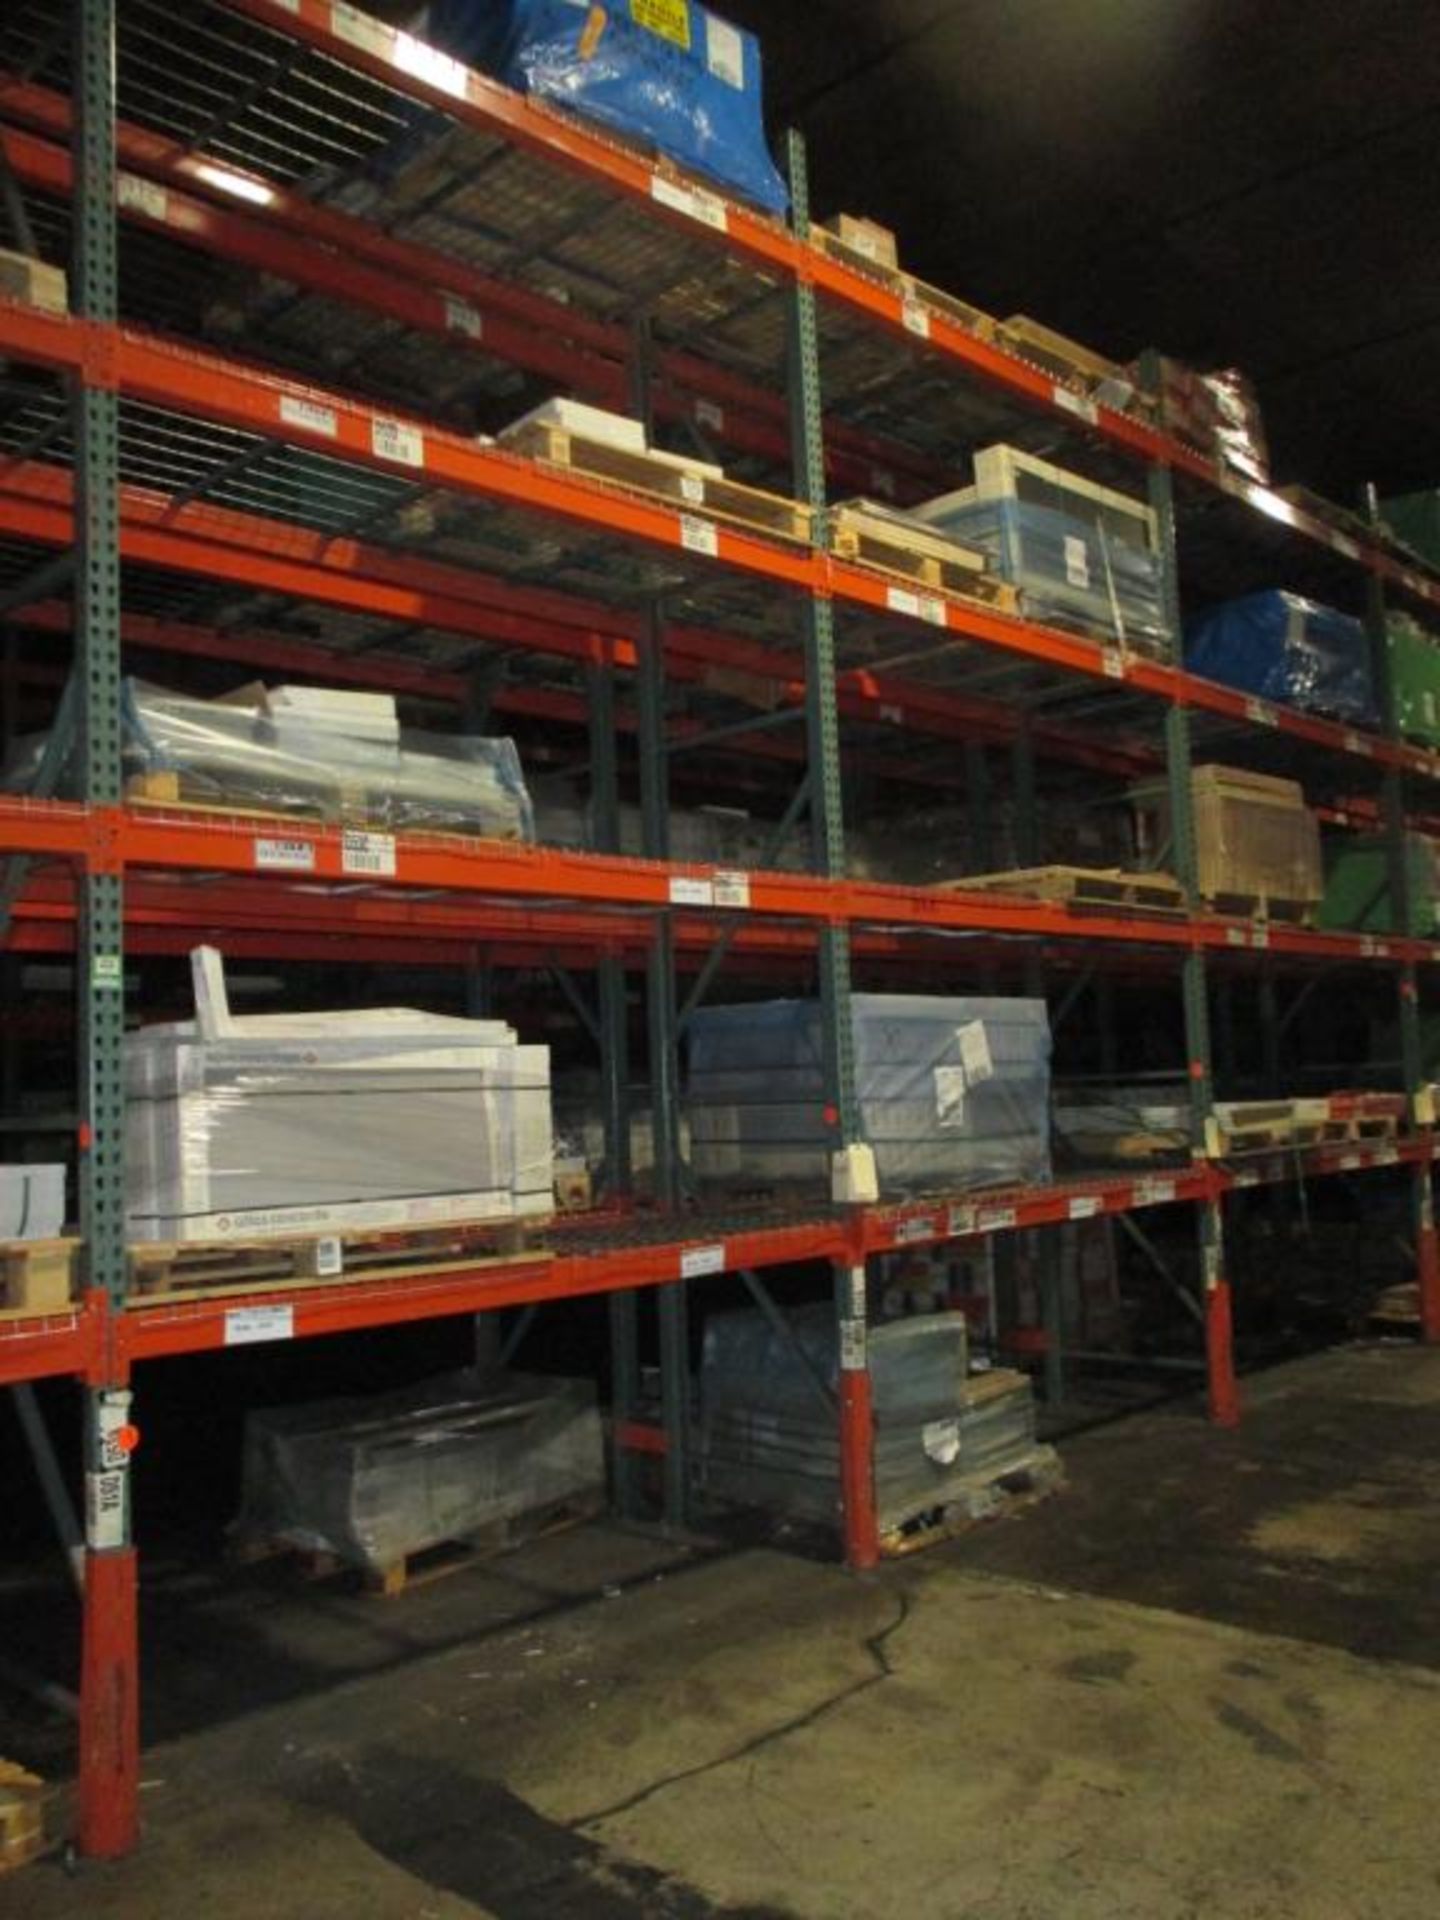 (18) Pallets of Assorted Tiles